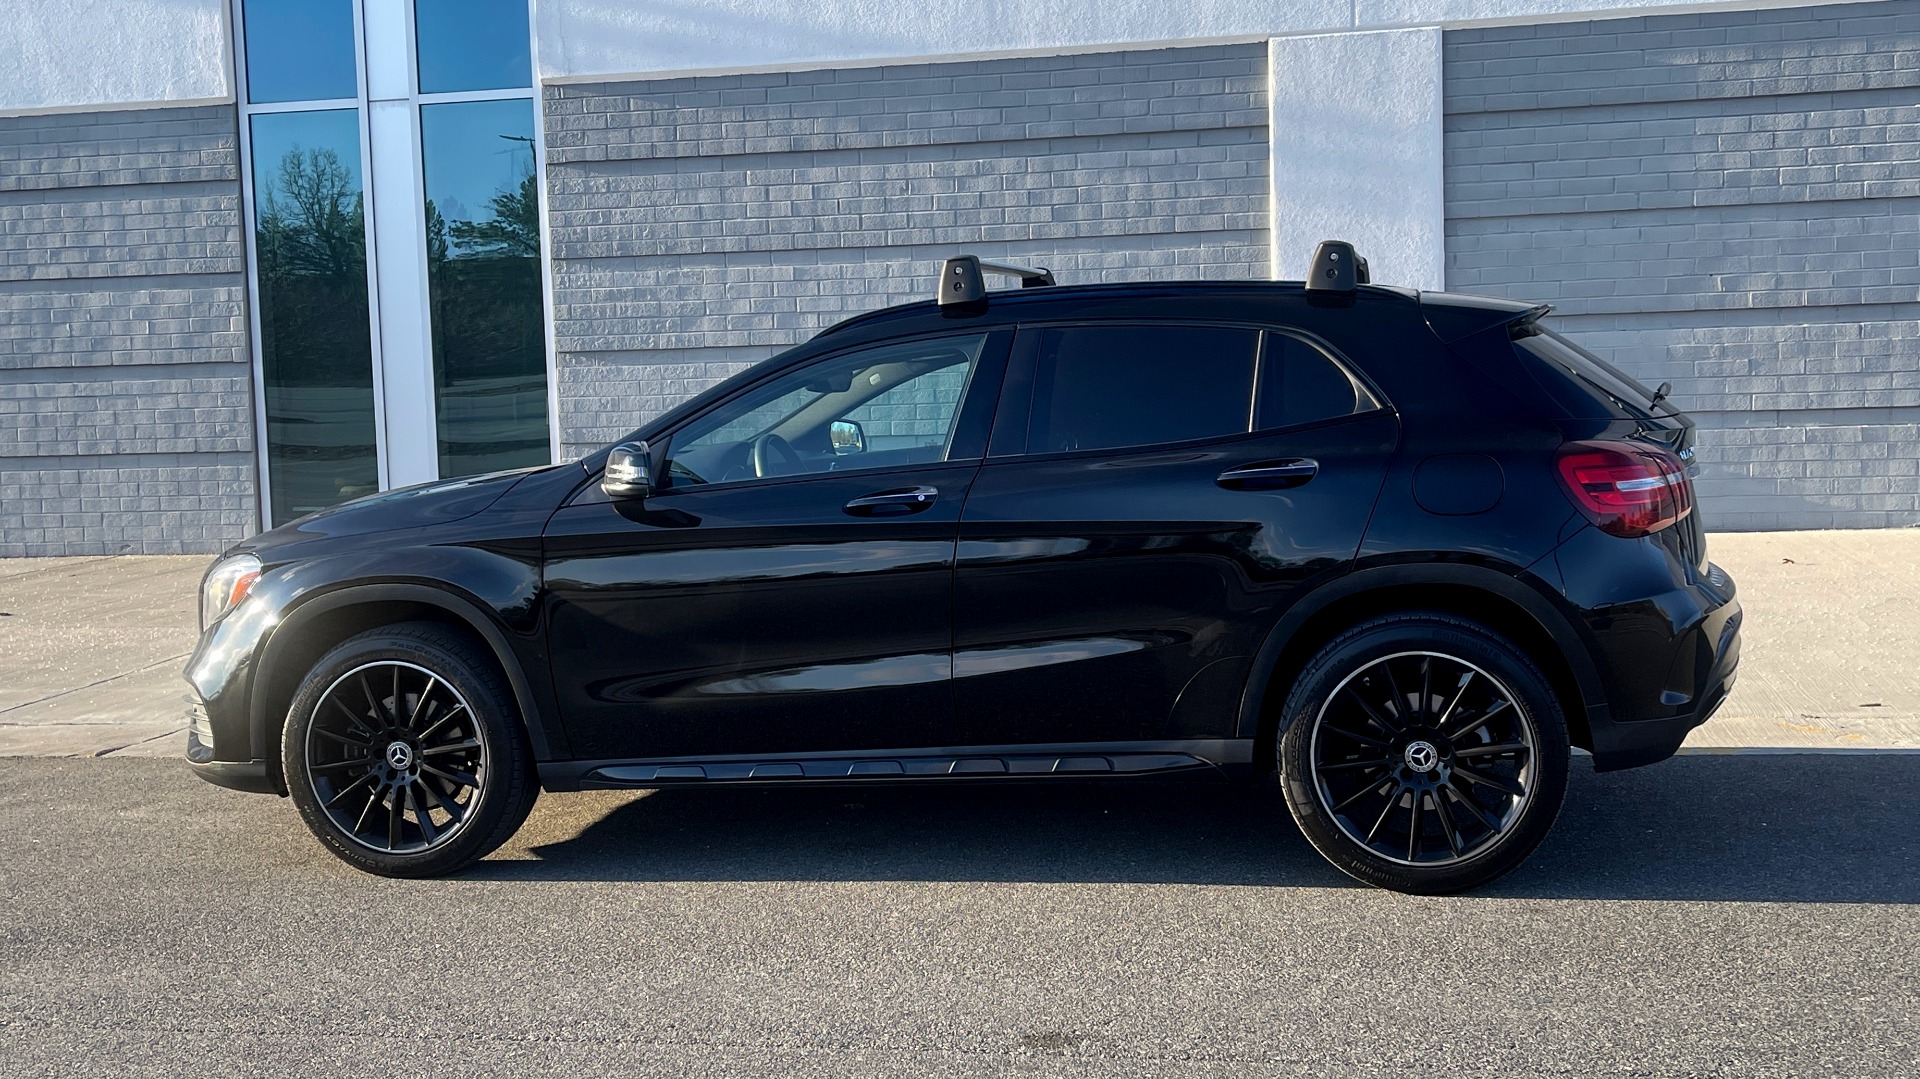 Used 2018 Mercedes-Benz GLA 250 PREMIUM / MULTI-MEDIA / PANO-ROOF / AMG LINE / NIGHT PKG / H/K SND for sale Sold at Formula Imports in Charlotte NC 28227 3